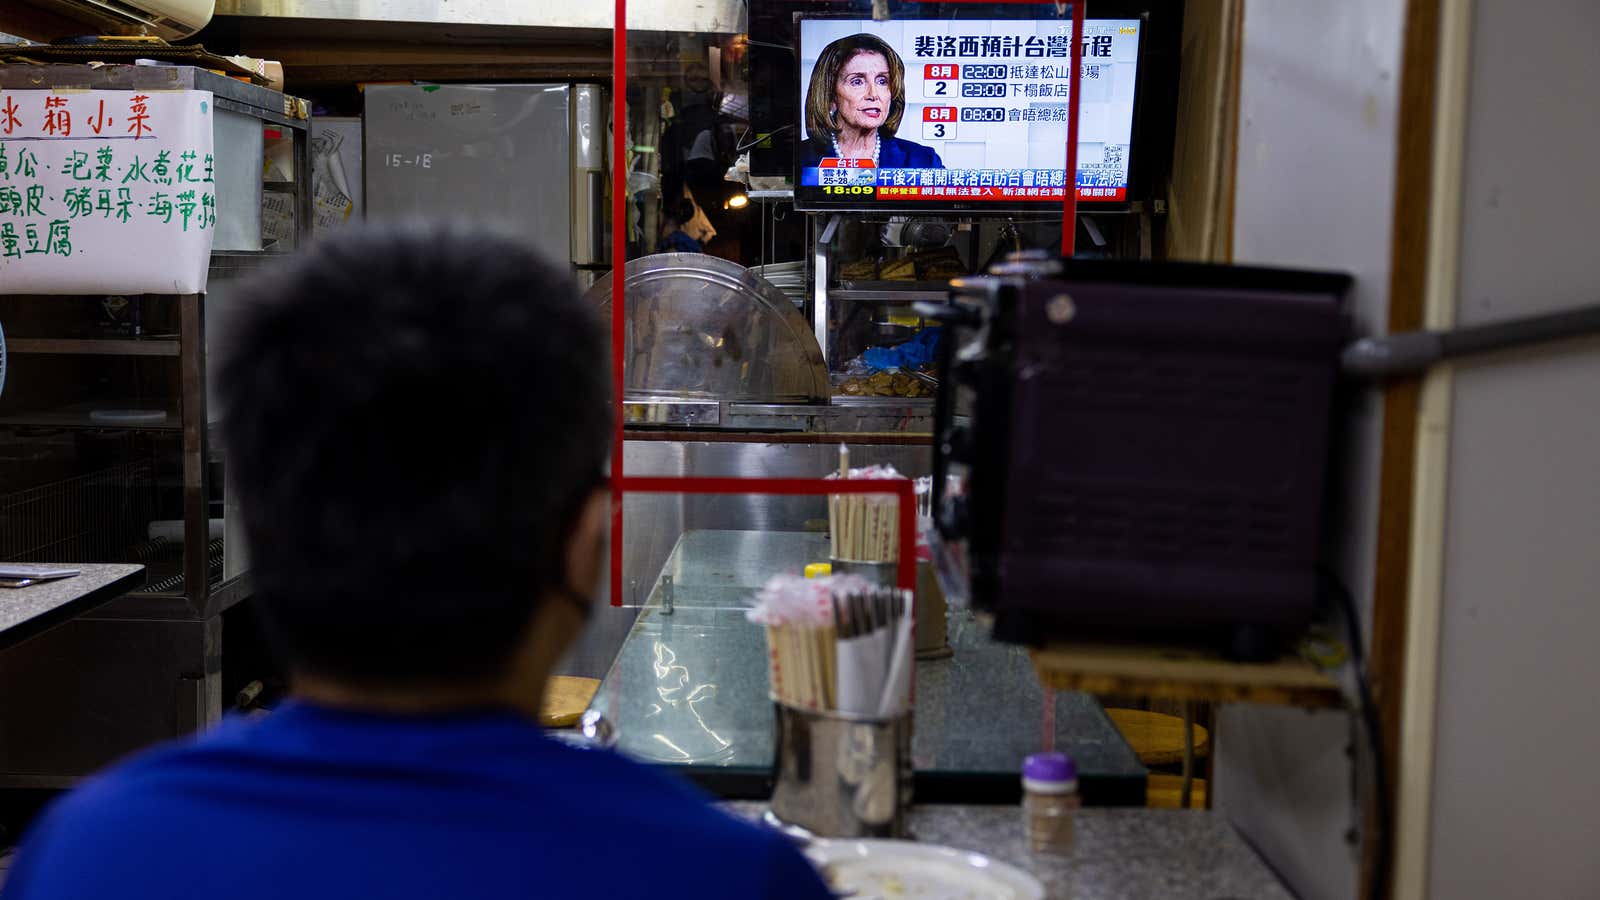 Television broadcasts news about Speaker of the House Nancy Pelosi (D-CA) at a local restaurant on August 02, 2022 in Taipei, Taiwan. 